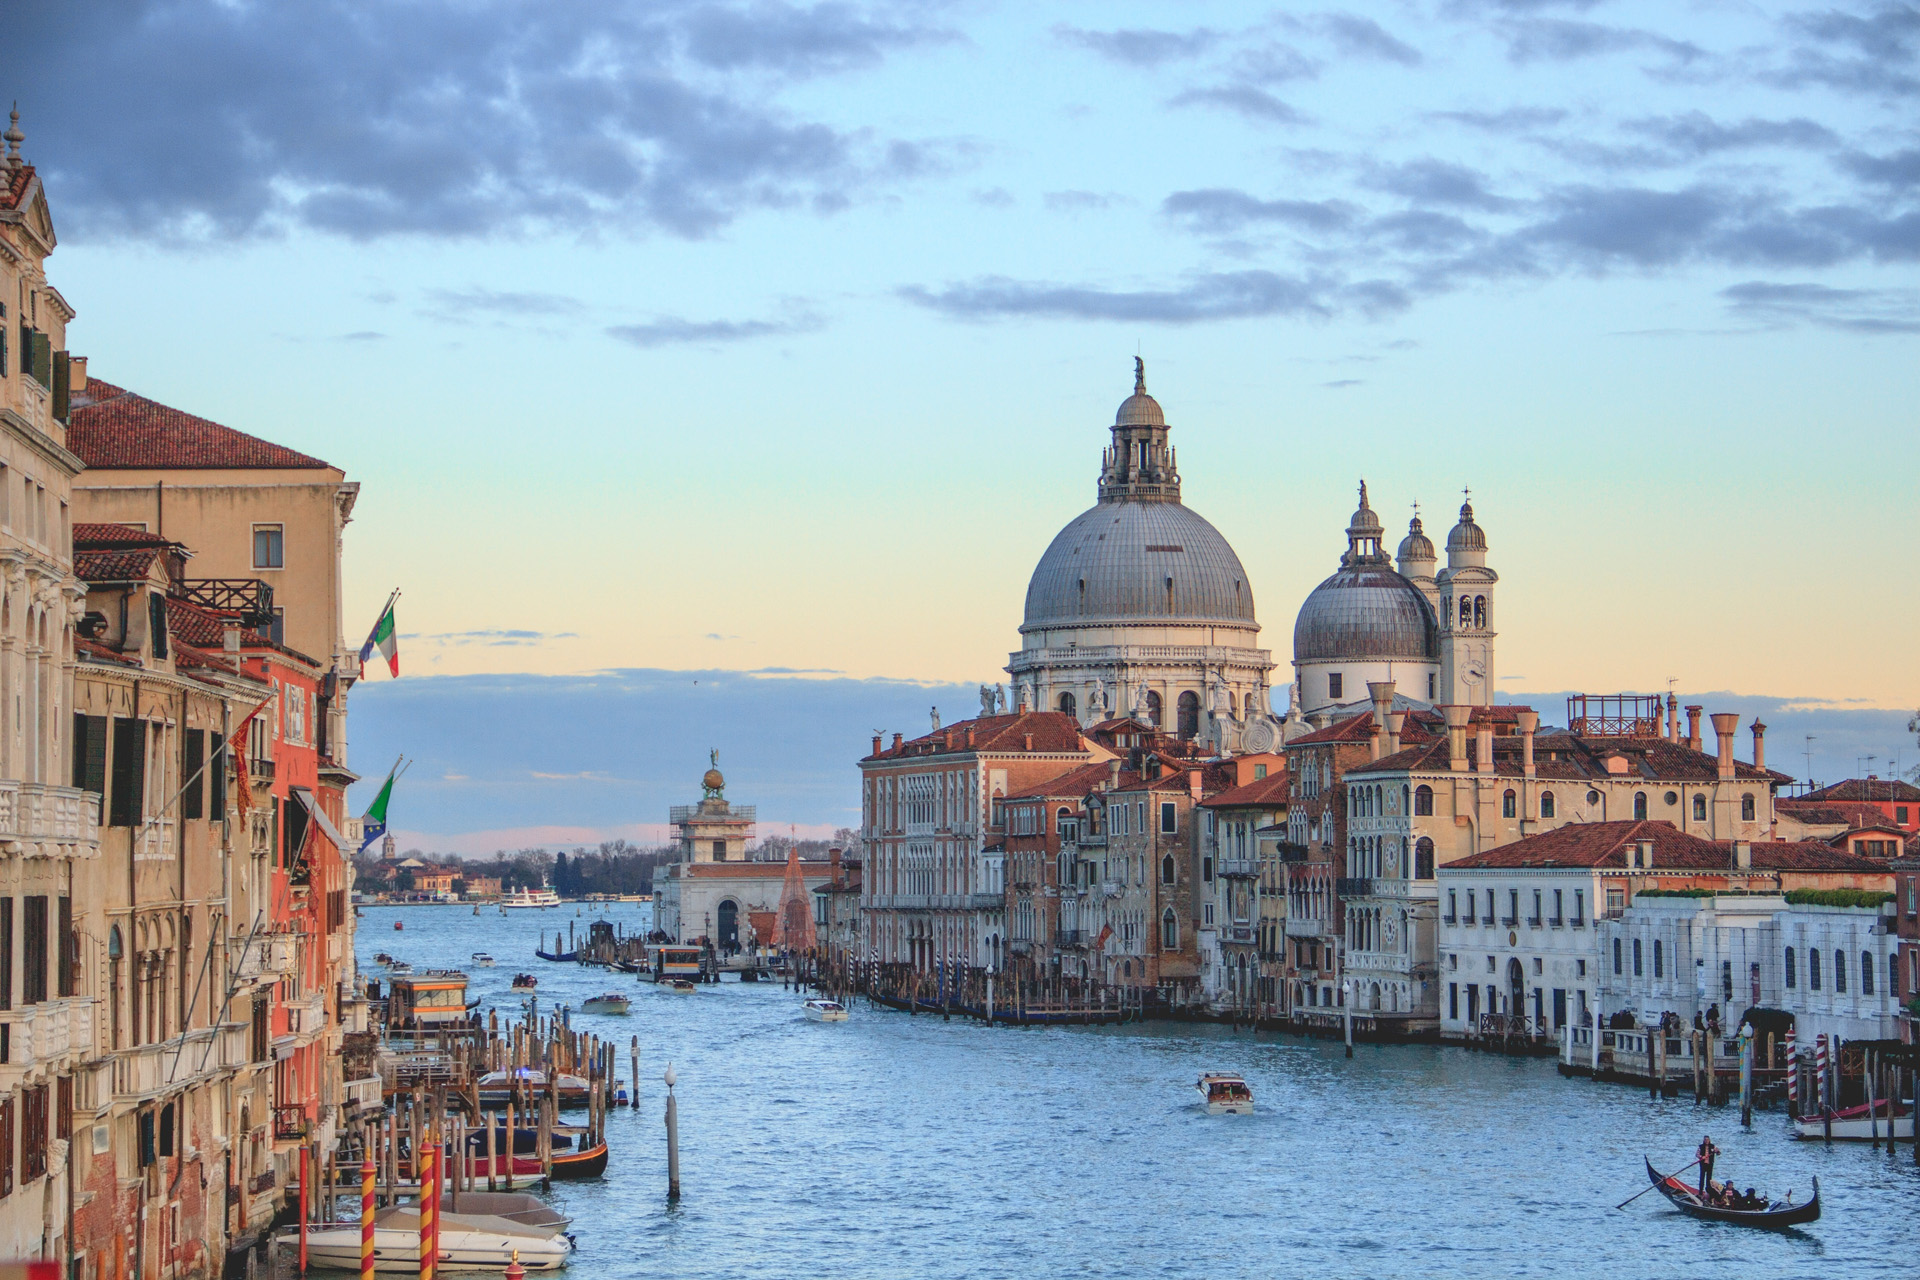 UNESCO Is Reviewing Its World Heritage Sites – And Venice Might Be In The Danger Zone